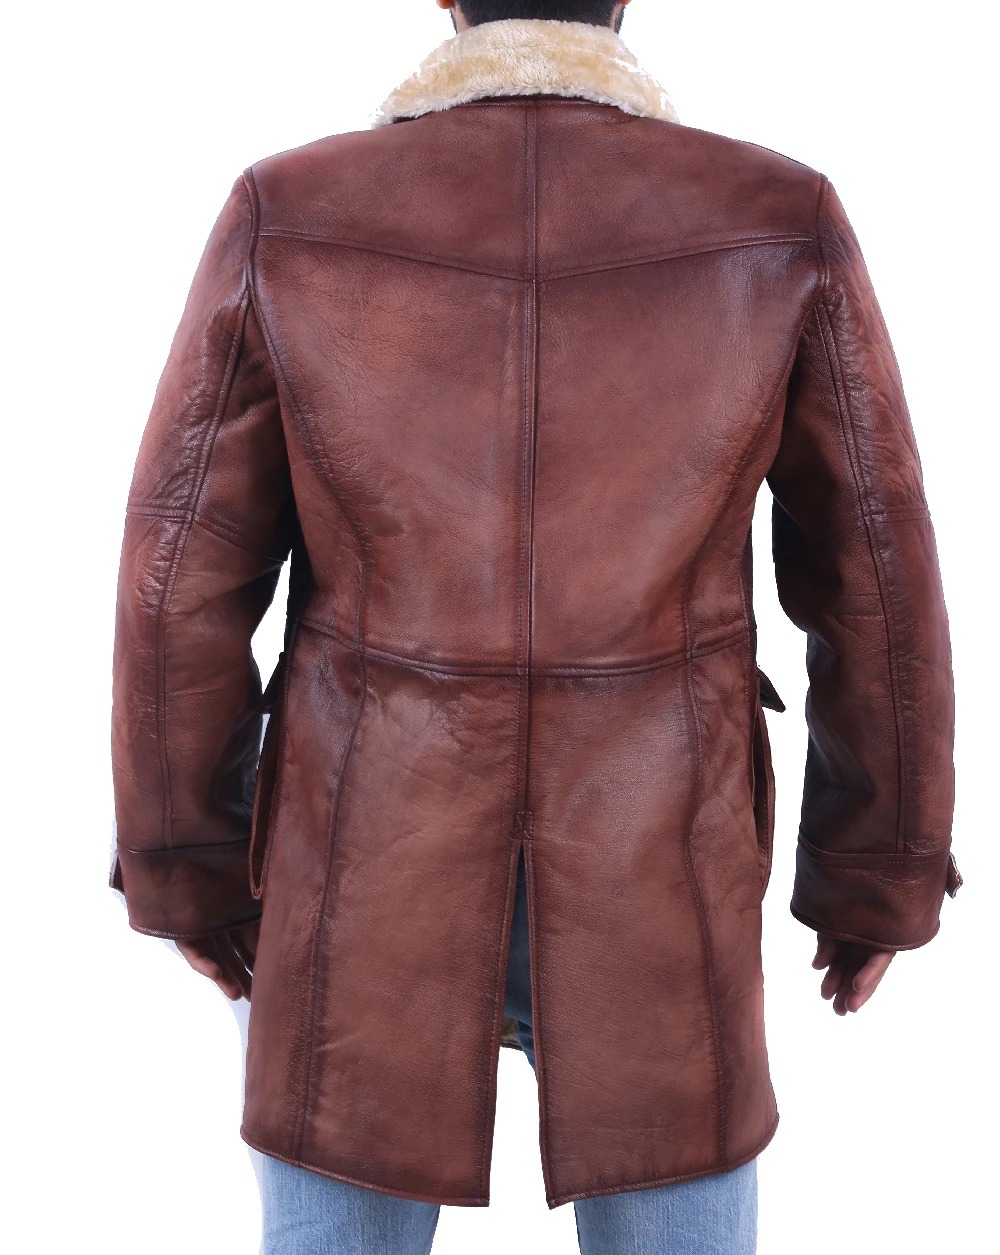 Tom Hardy Bane Coat Dark Knight Rises Brown Leather Trench Coat